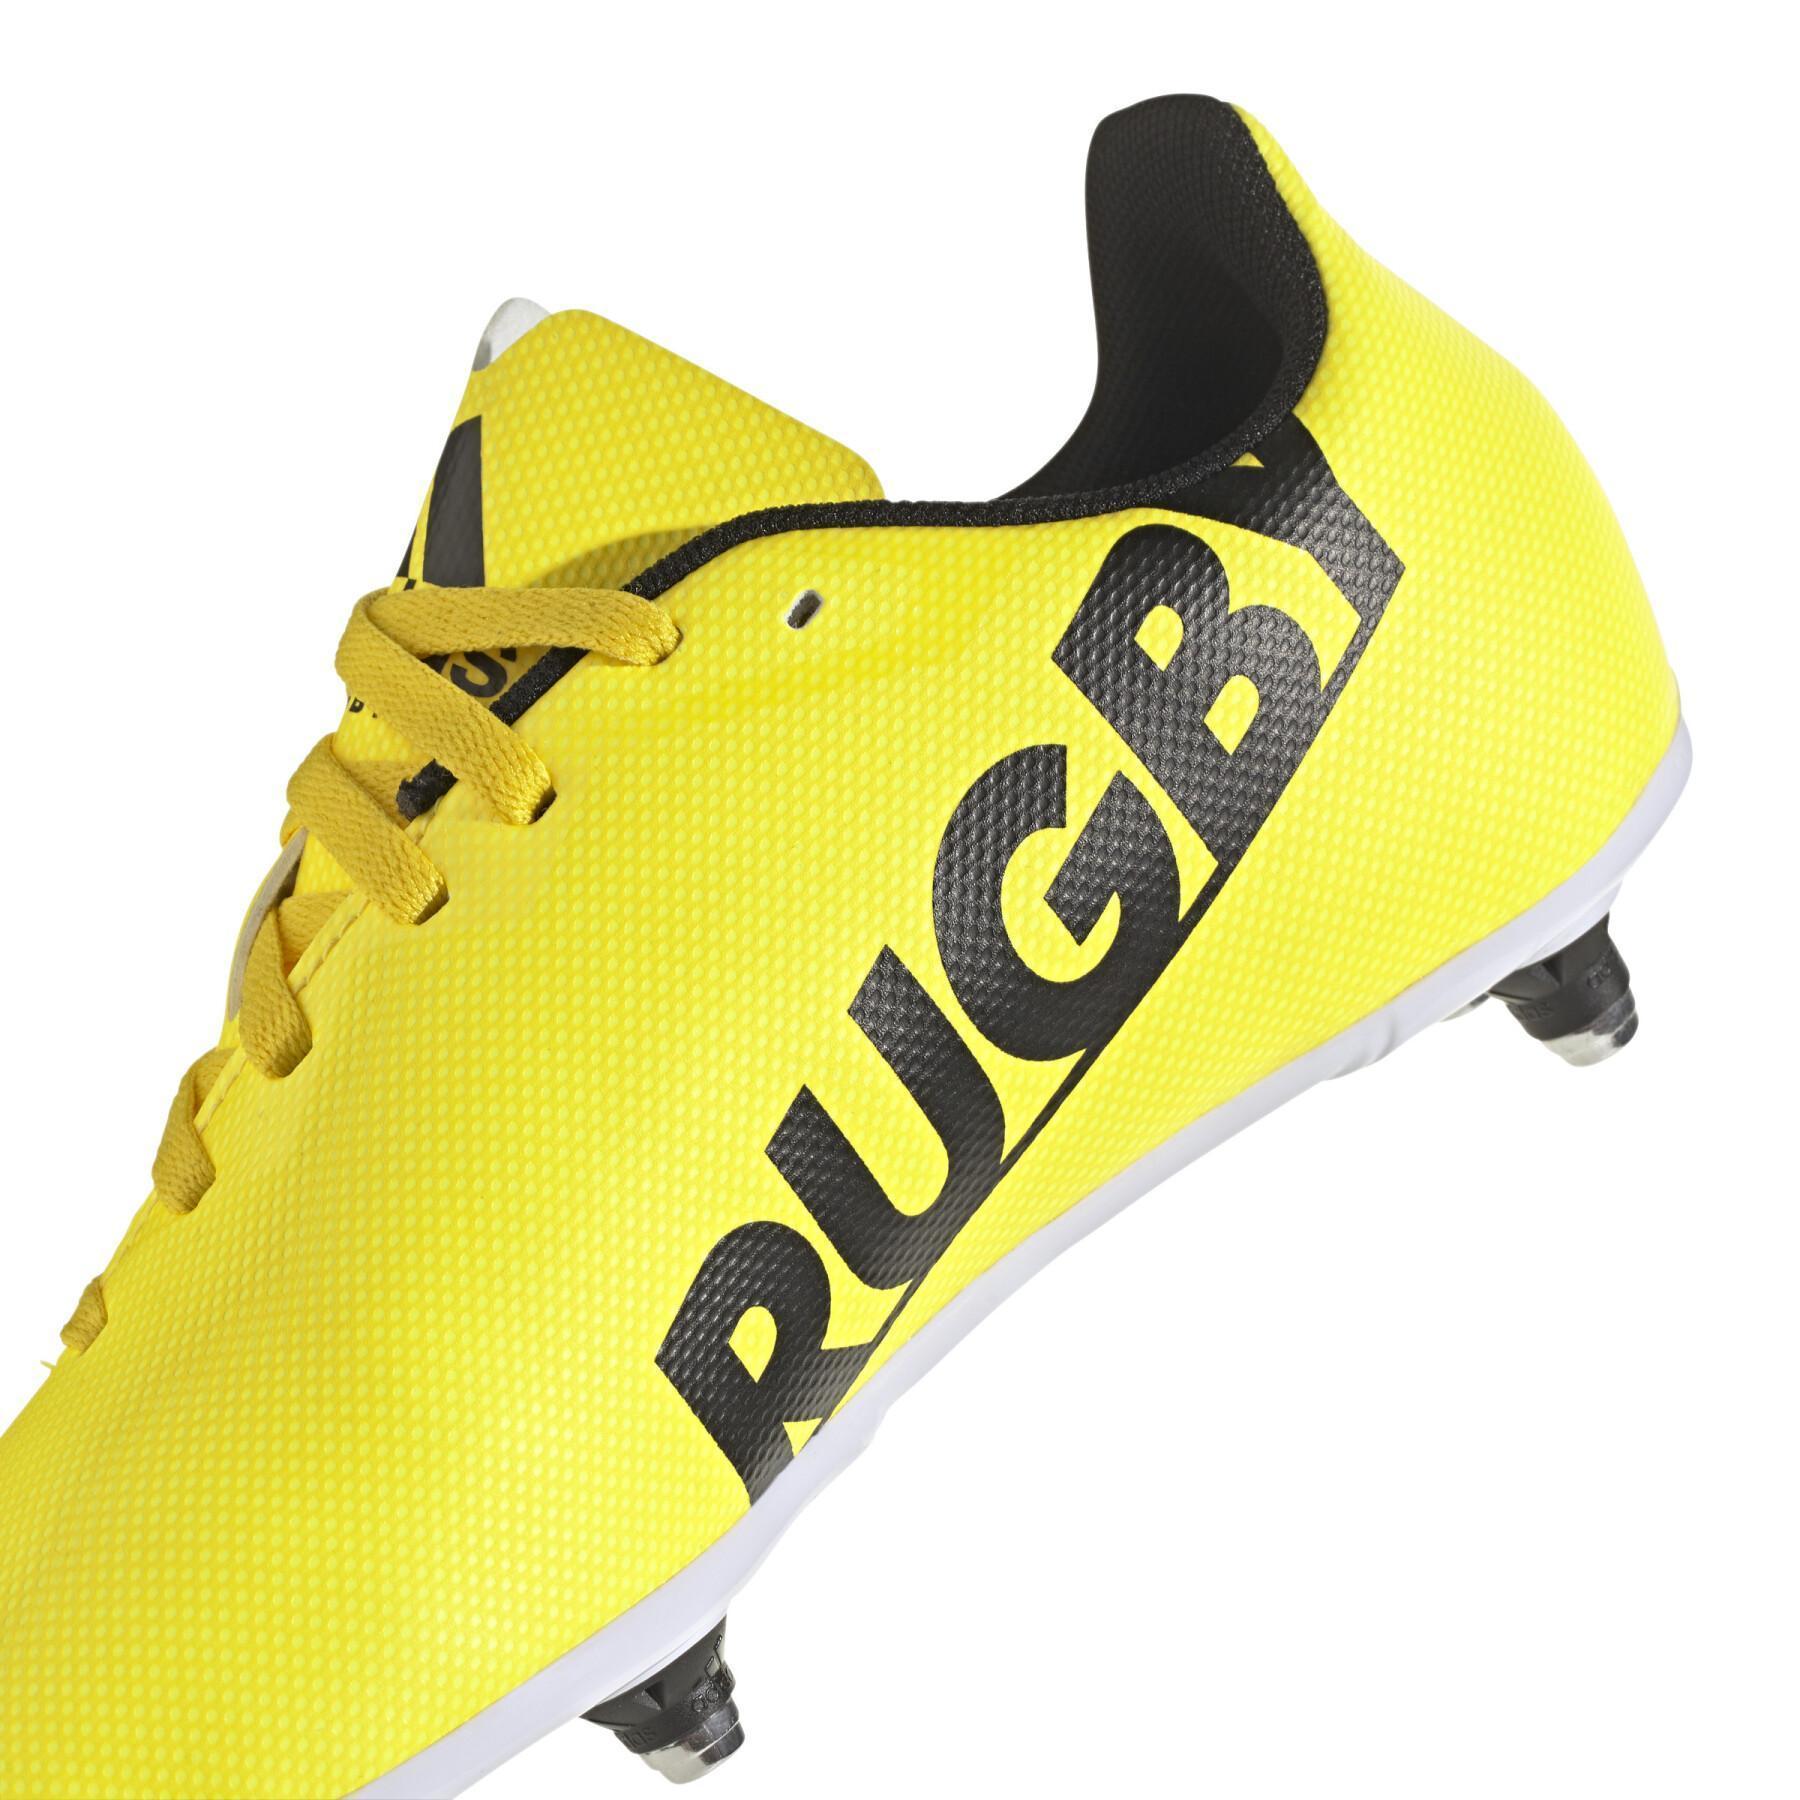 Chaussures de rugby enfant adidas Rugby SG